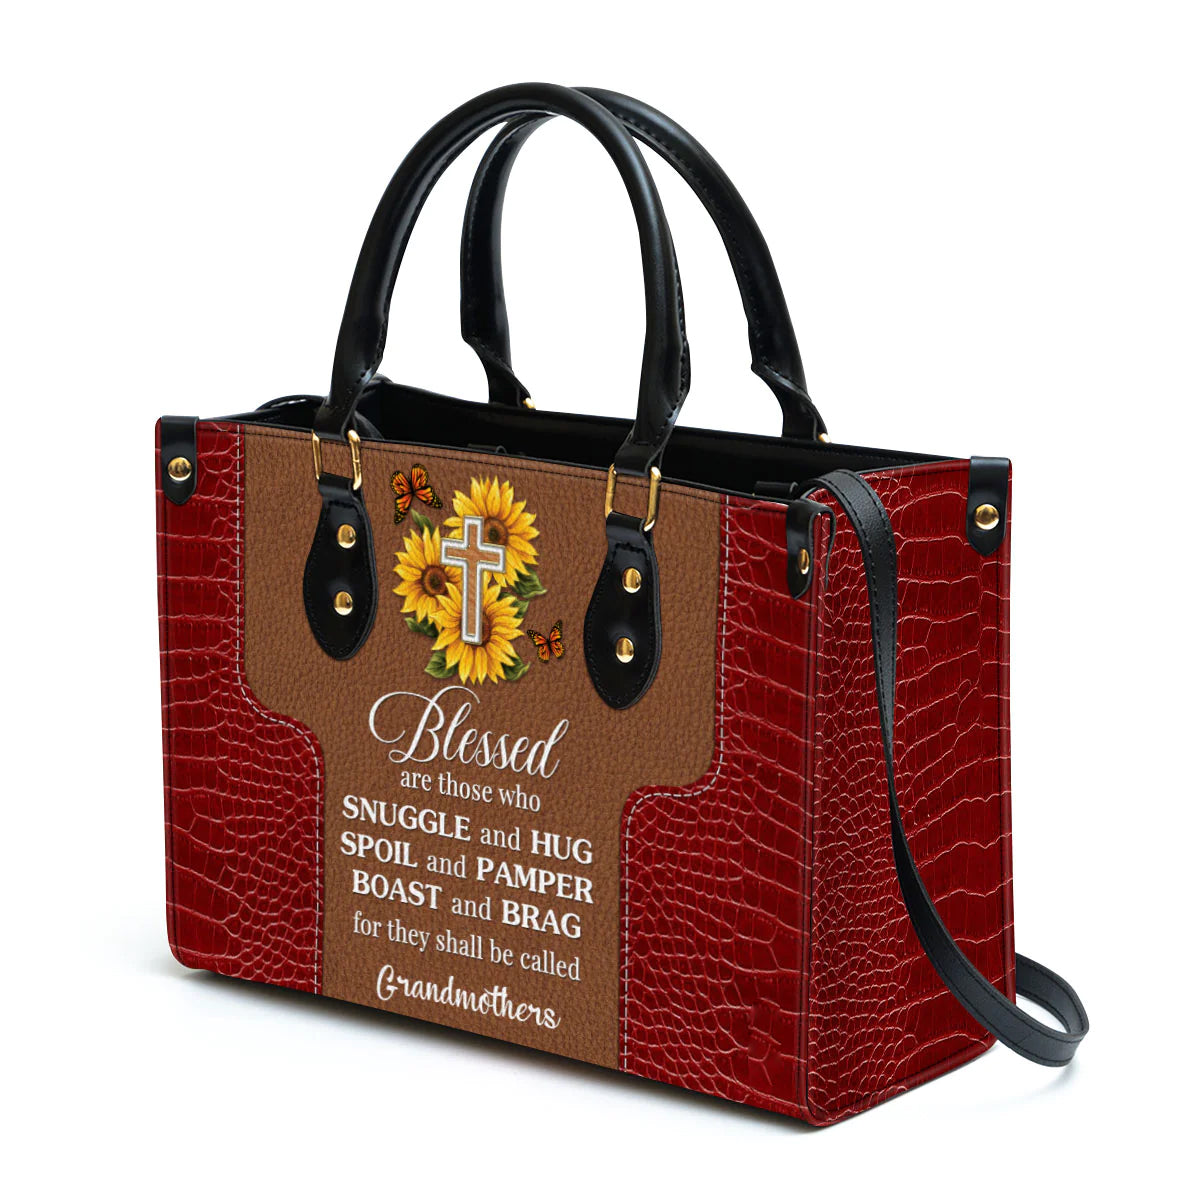 Christianart Designer Handbags, Blessed Are Those Who Spoil And Pamper, Personalized Gifts, Gifts for Women, Christmas Gift. - Christian Art Bag